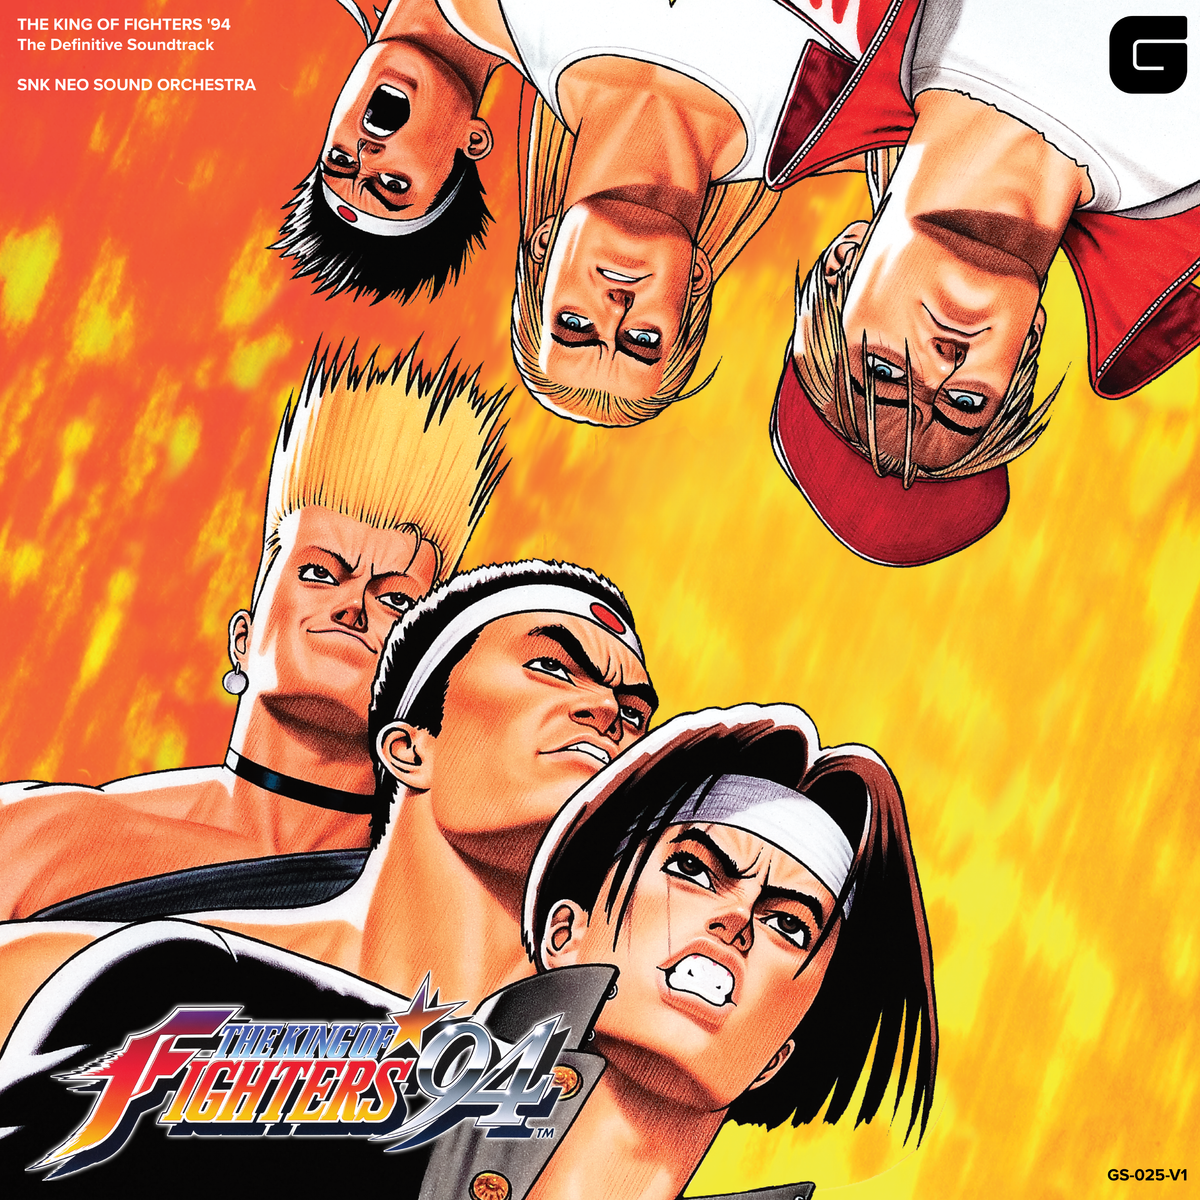 The King of Fighters '94 - The Definitive Soundtrack - CD